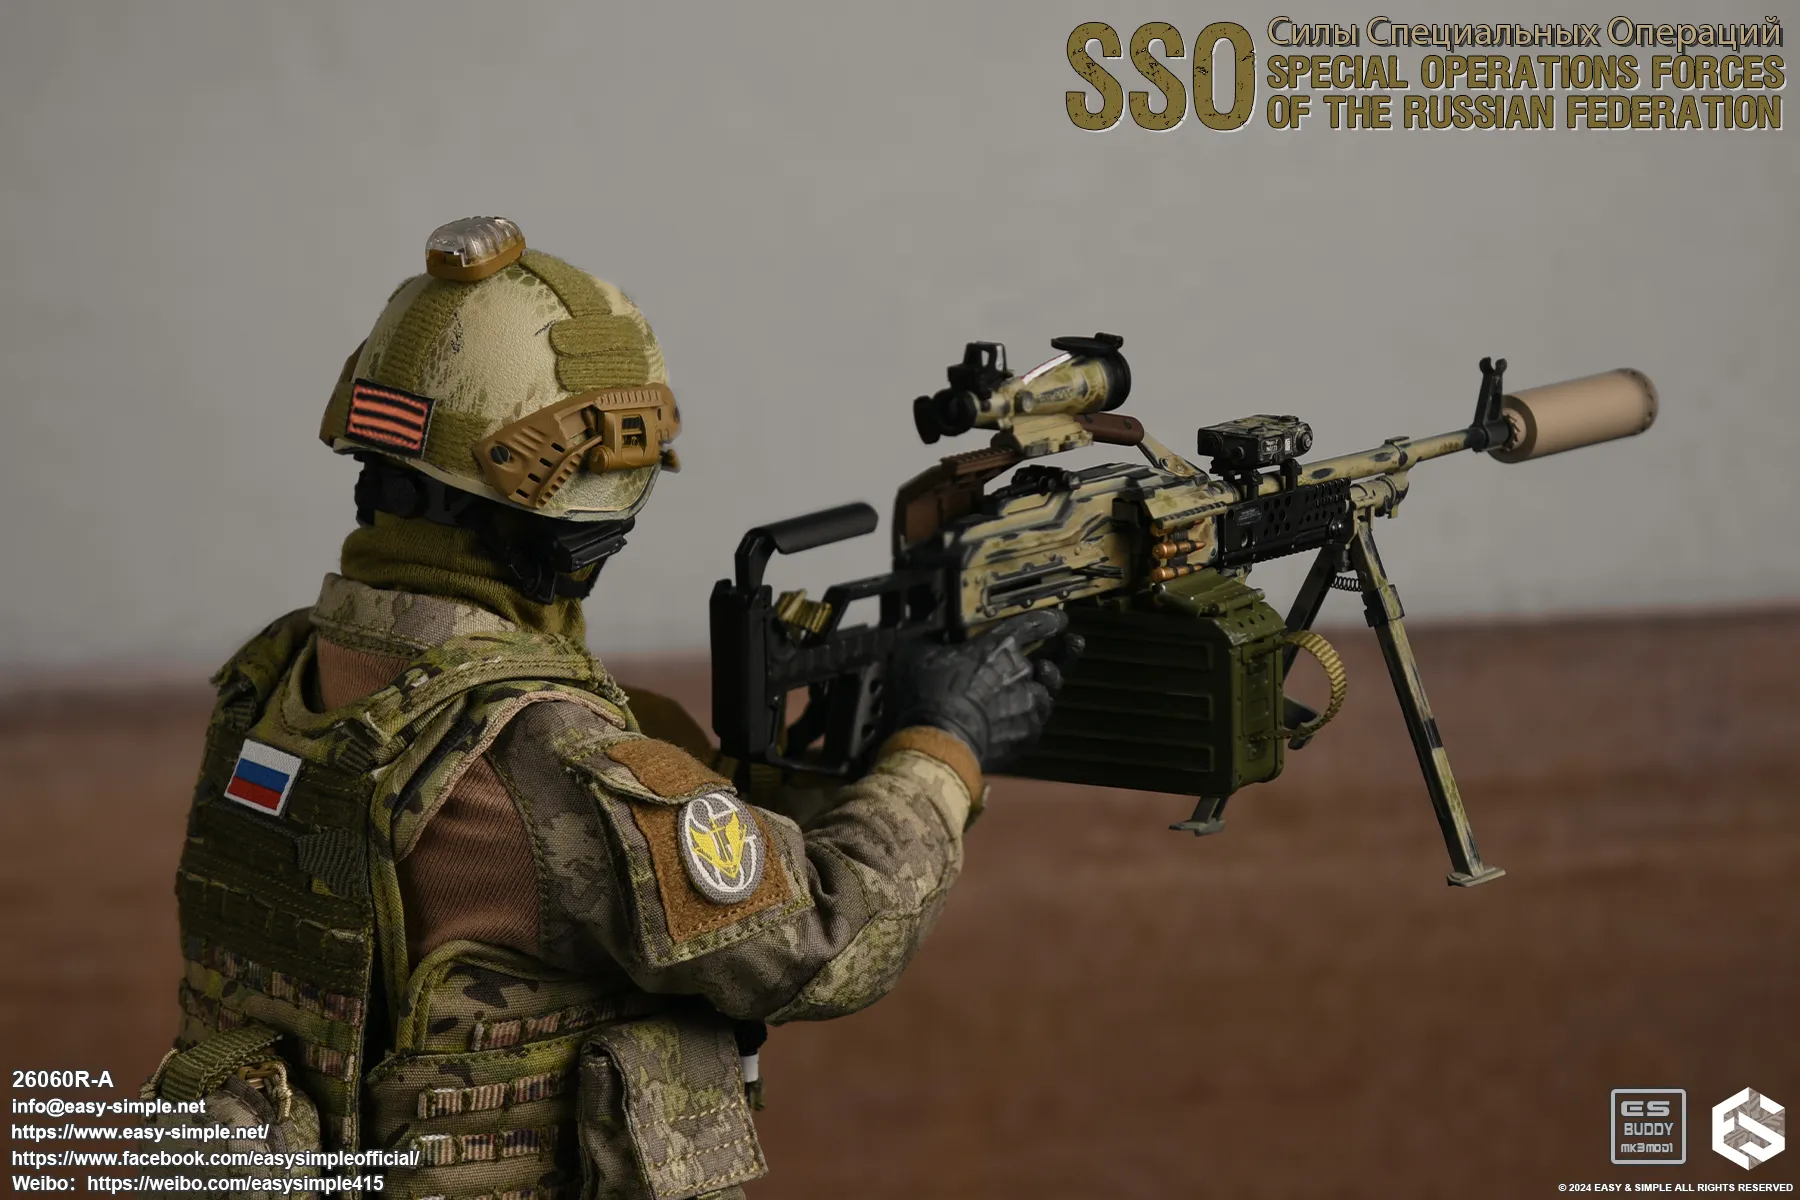 special - NEW PRODUCT: Easy&Simple 26060R-A Russian Special Operations Forces (SSO) Format,webp